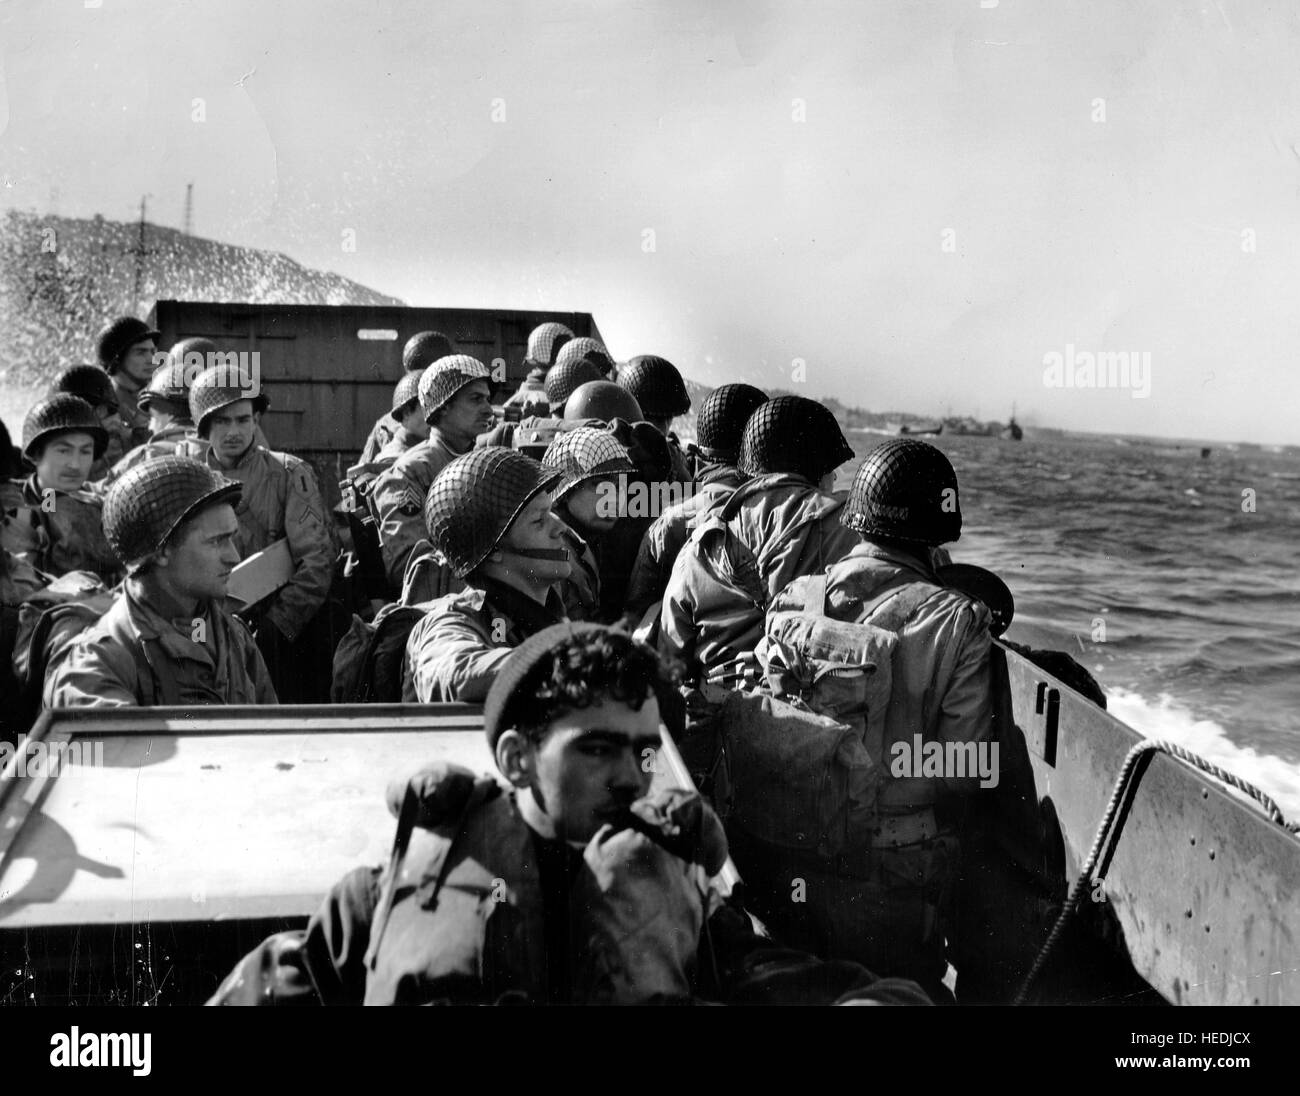 Normandy, France, June 6, 1944. D-Day, the Allied soldiers disembark from transport ships, World War II Stock Photo